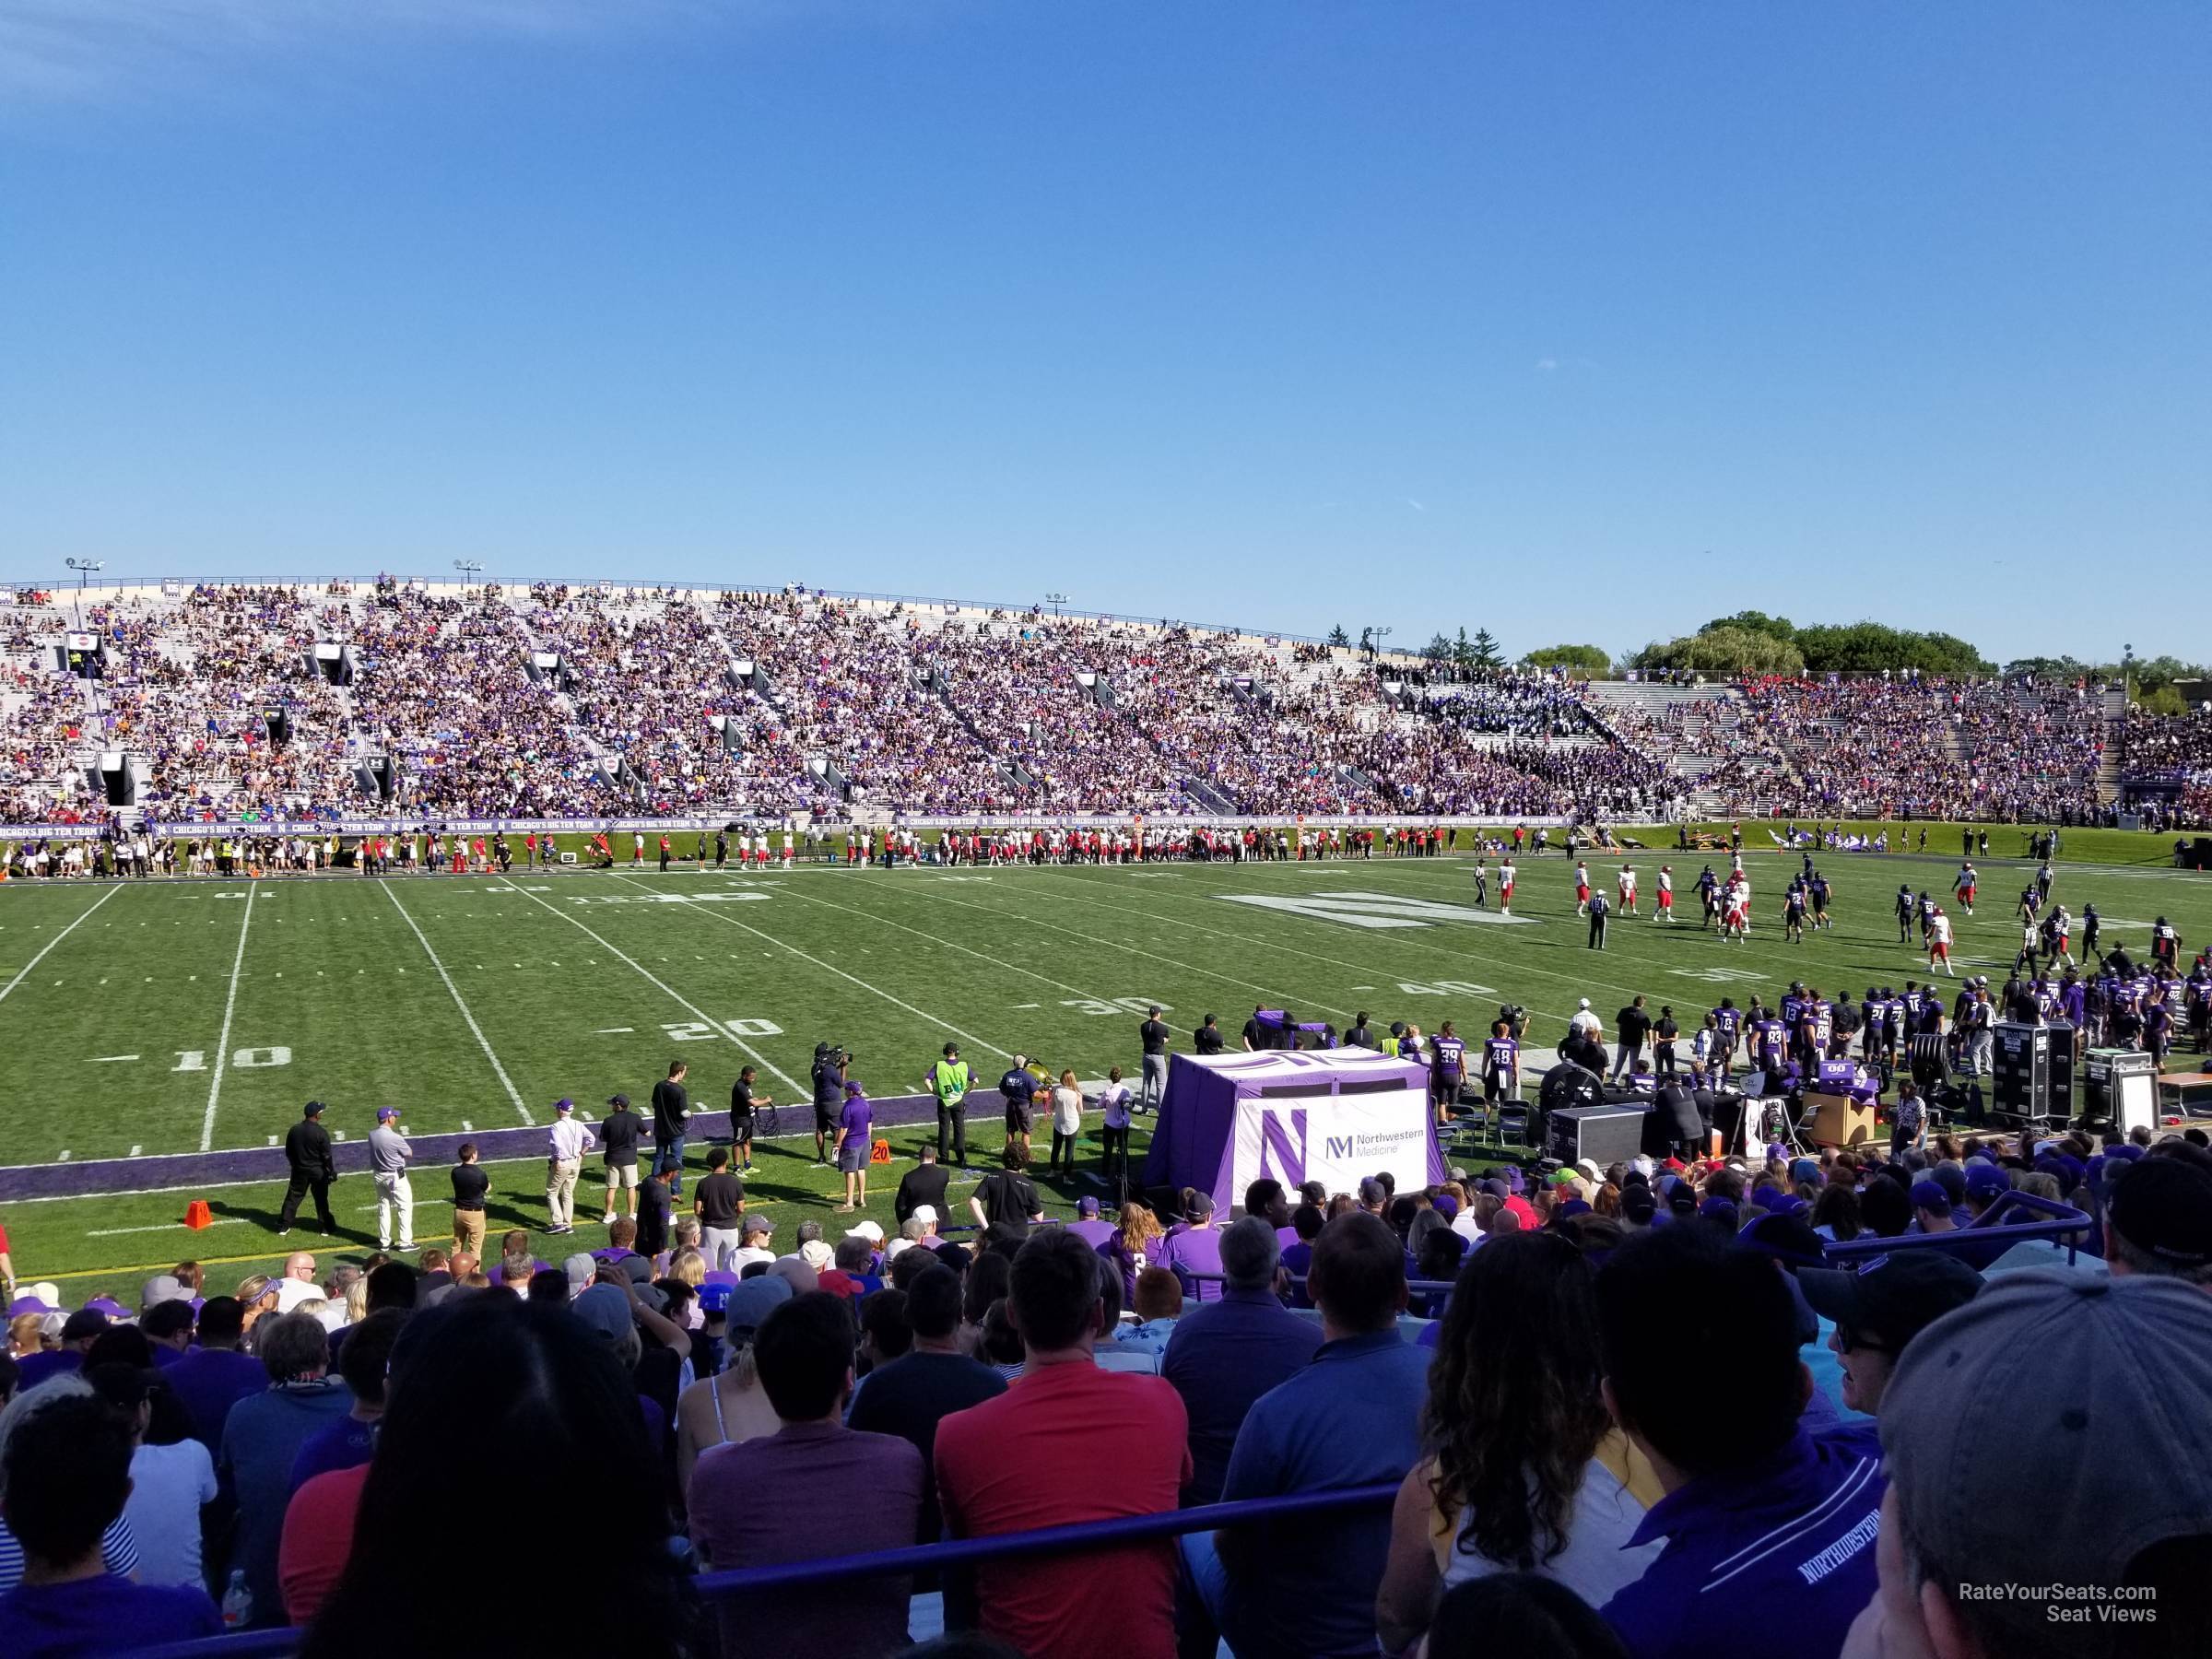 section 132, row 22 seat view  - ryan field